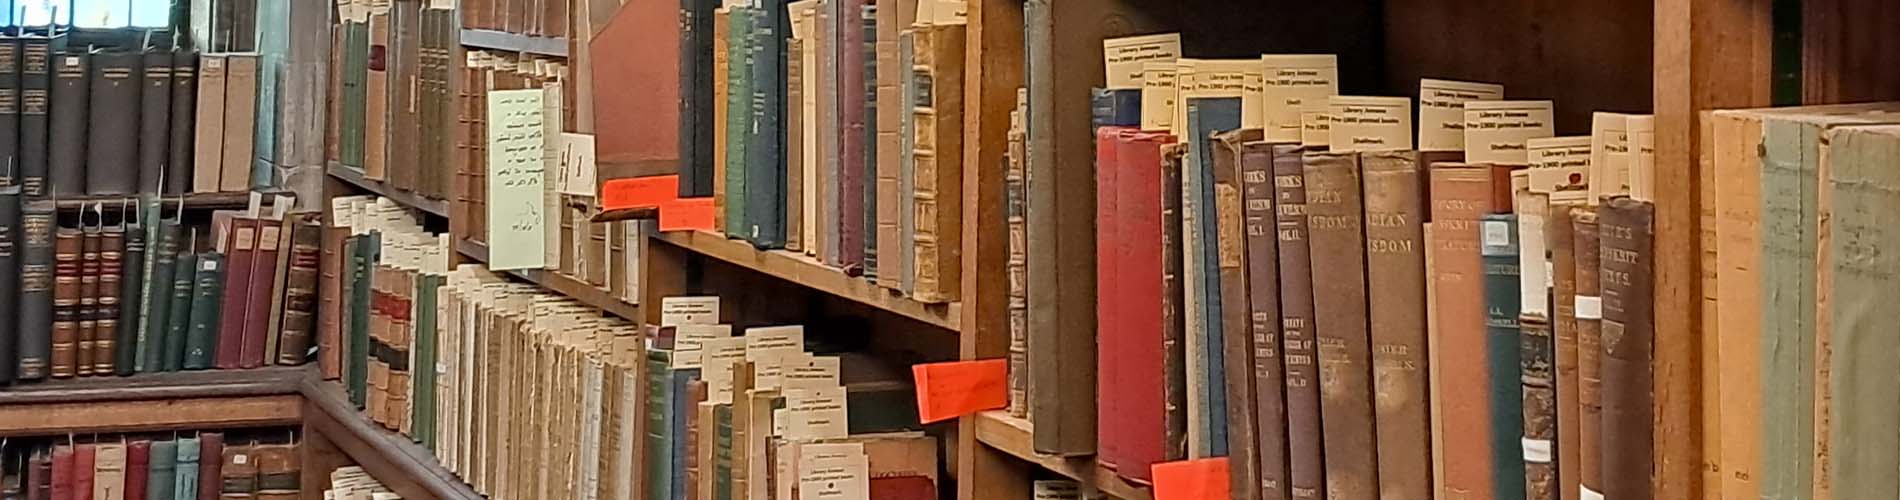 A shelf of library books